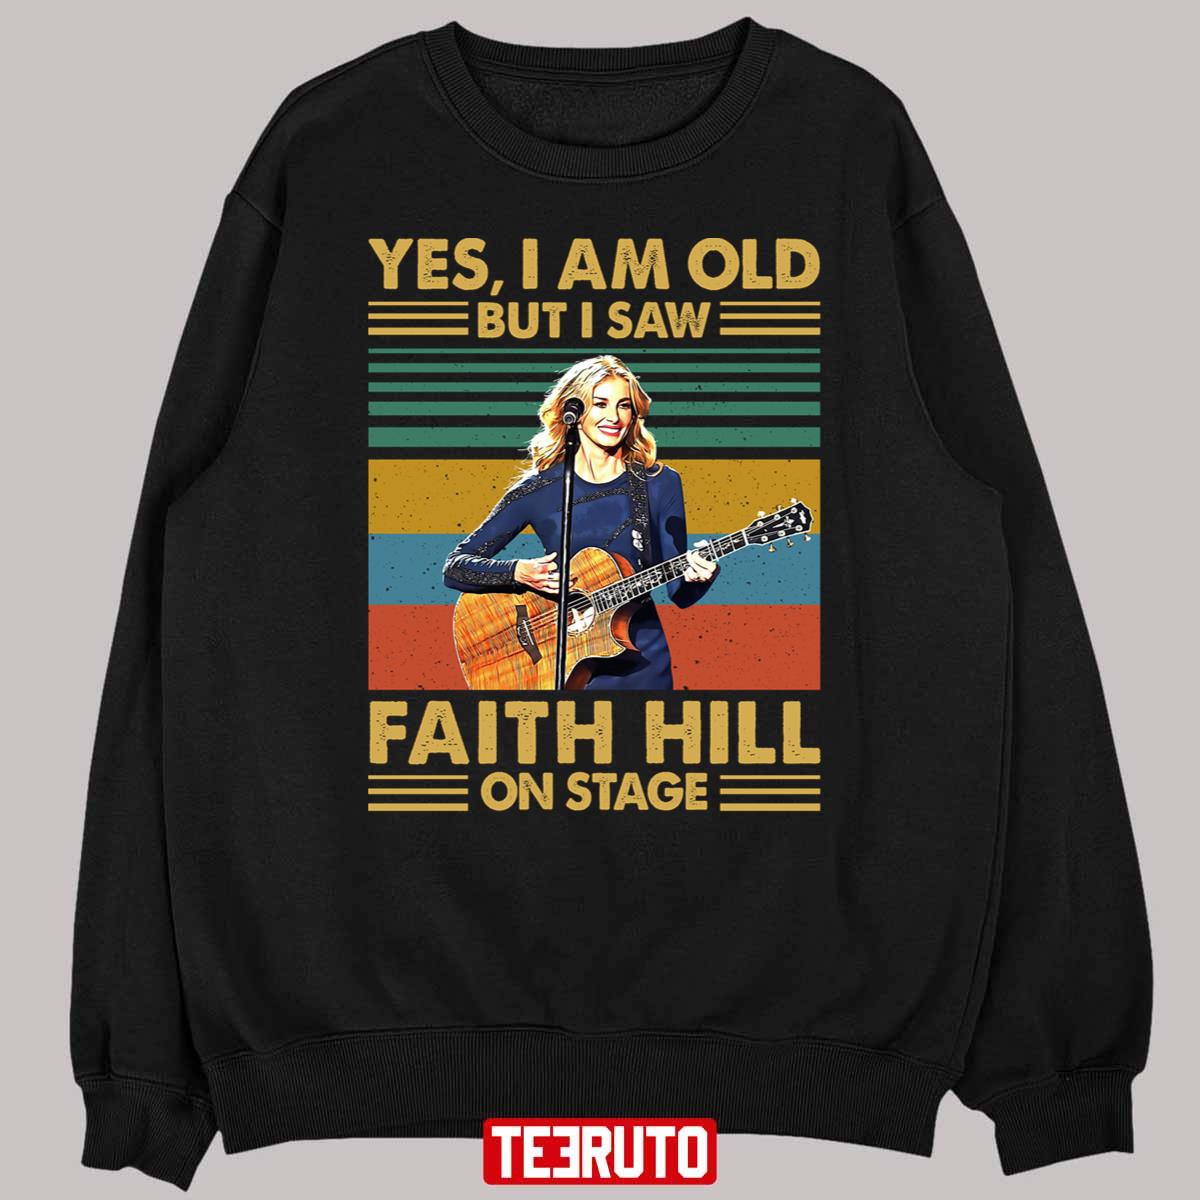 Retro Yes I'm Old But I Saw Faith Hill Music On Stage Unisex T-Shirt